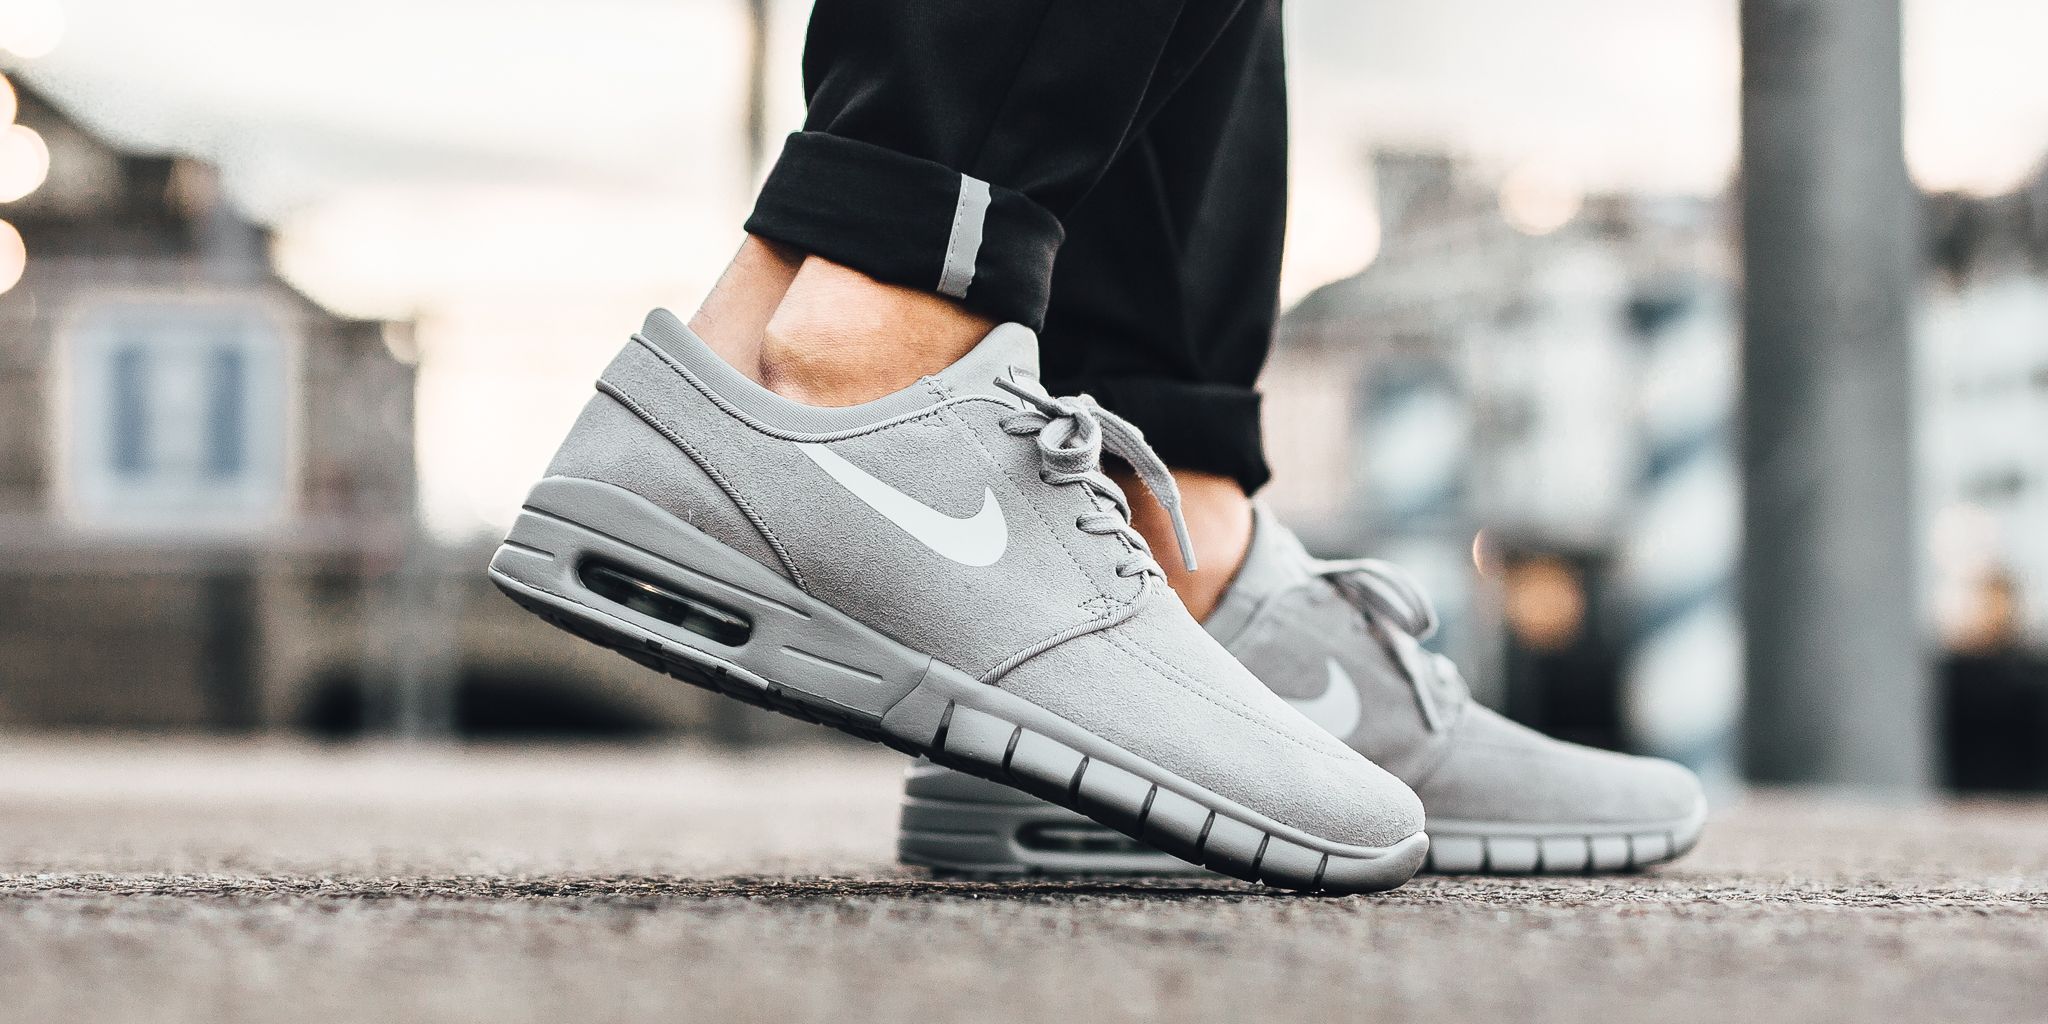 Titolo on Twitter: "NEW IN! Nike SB Stefan Janoski Max L - Matte Silver/Pure Platinum SHOP HERE: https://t.co/TiianxuHld / Twitter